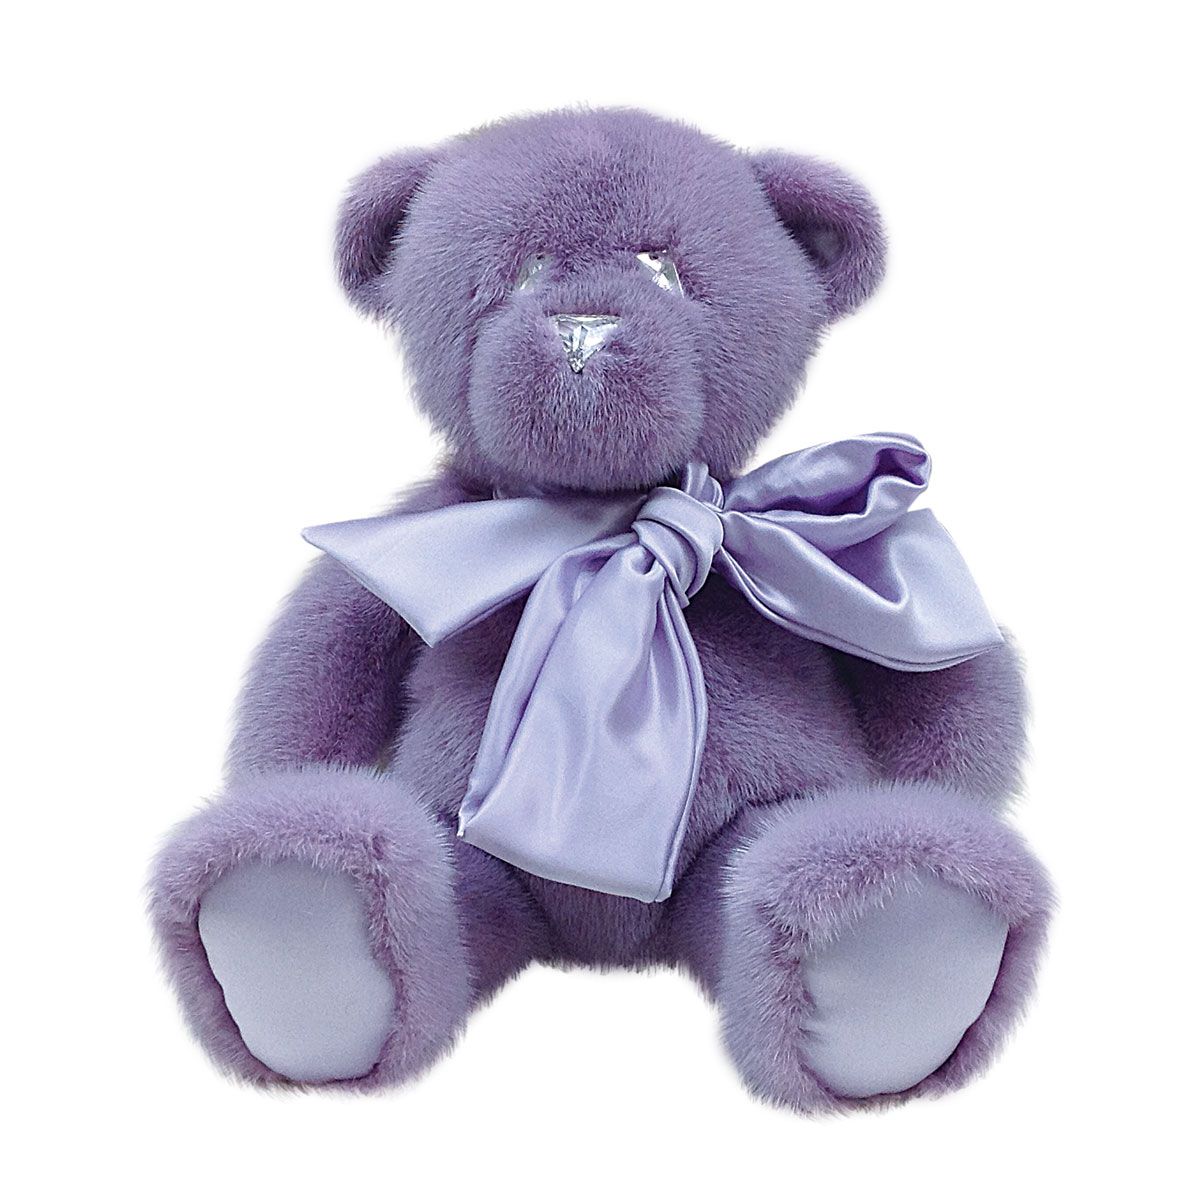 Why Luxury Teddy Bears are the Perfect Gift for Lockdown